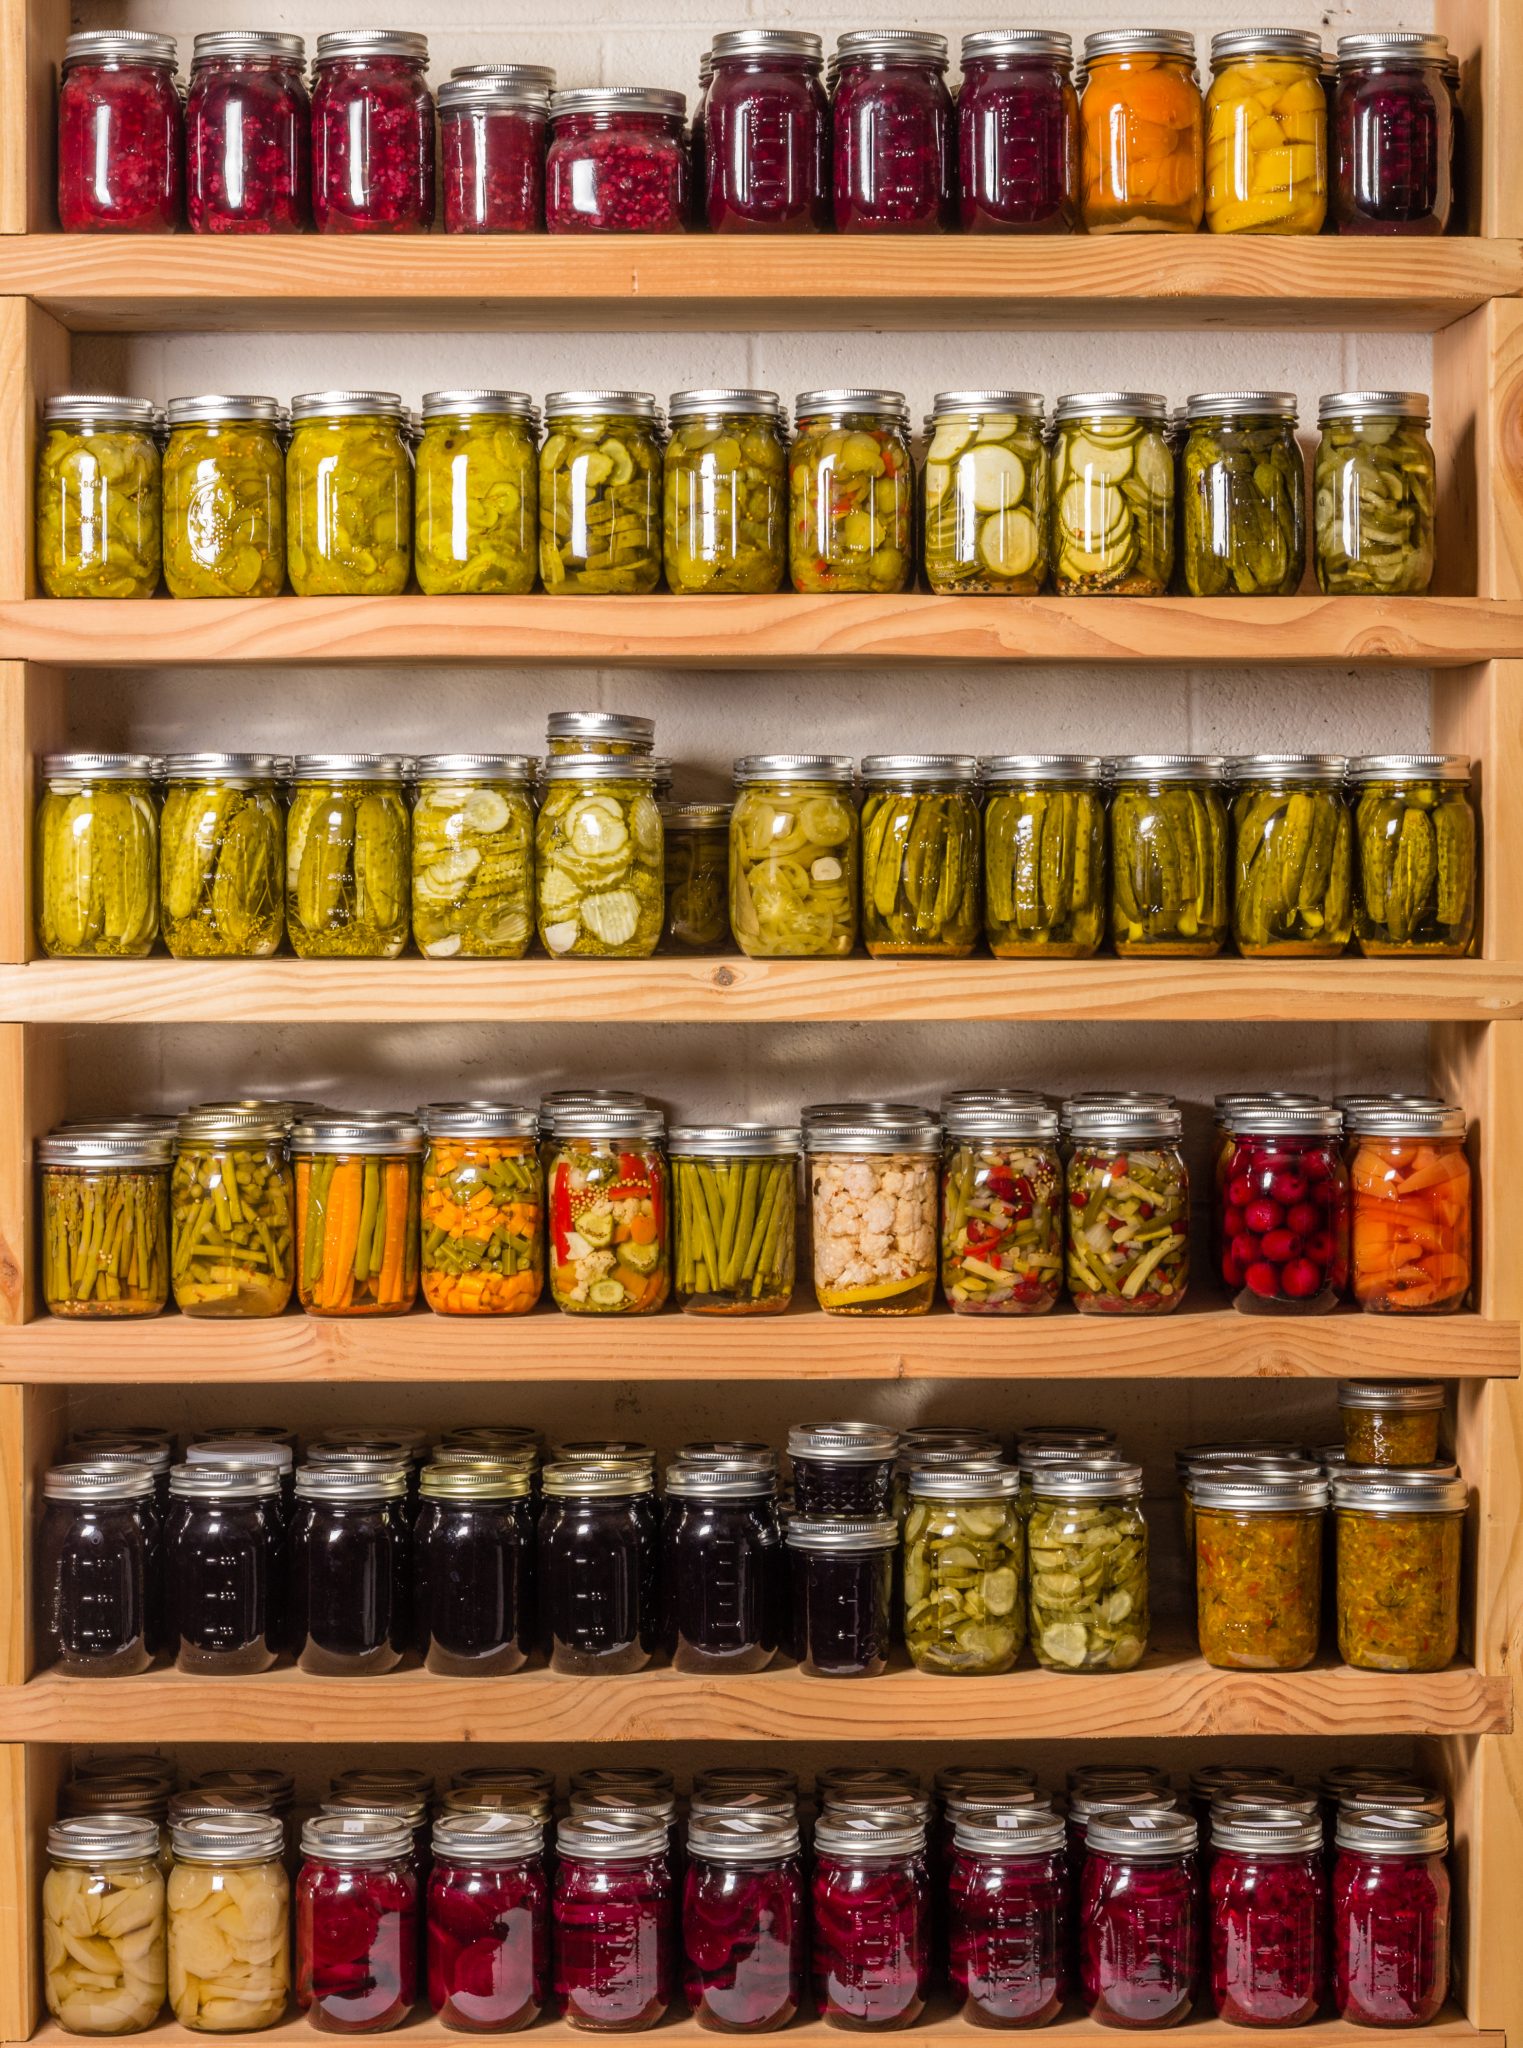 https://www.aces.edu/blog/topics/food-safety/wise-methods-of-canning-vegetables/shelves-of-canned-goods/